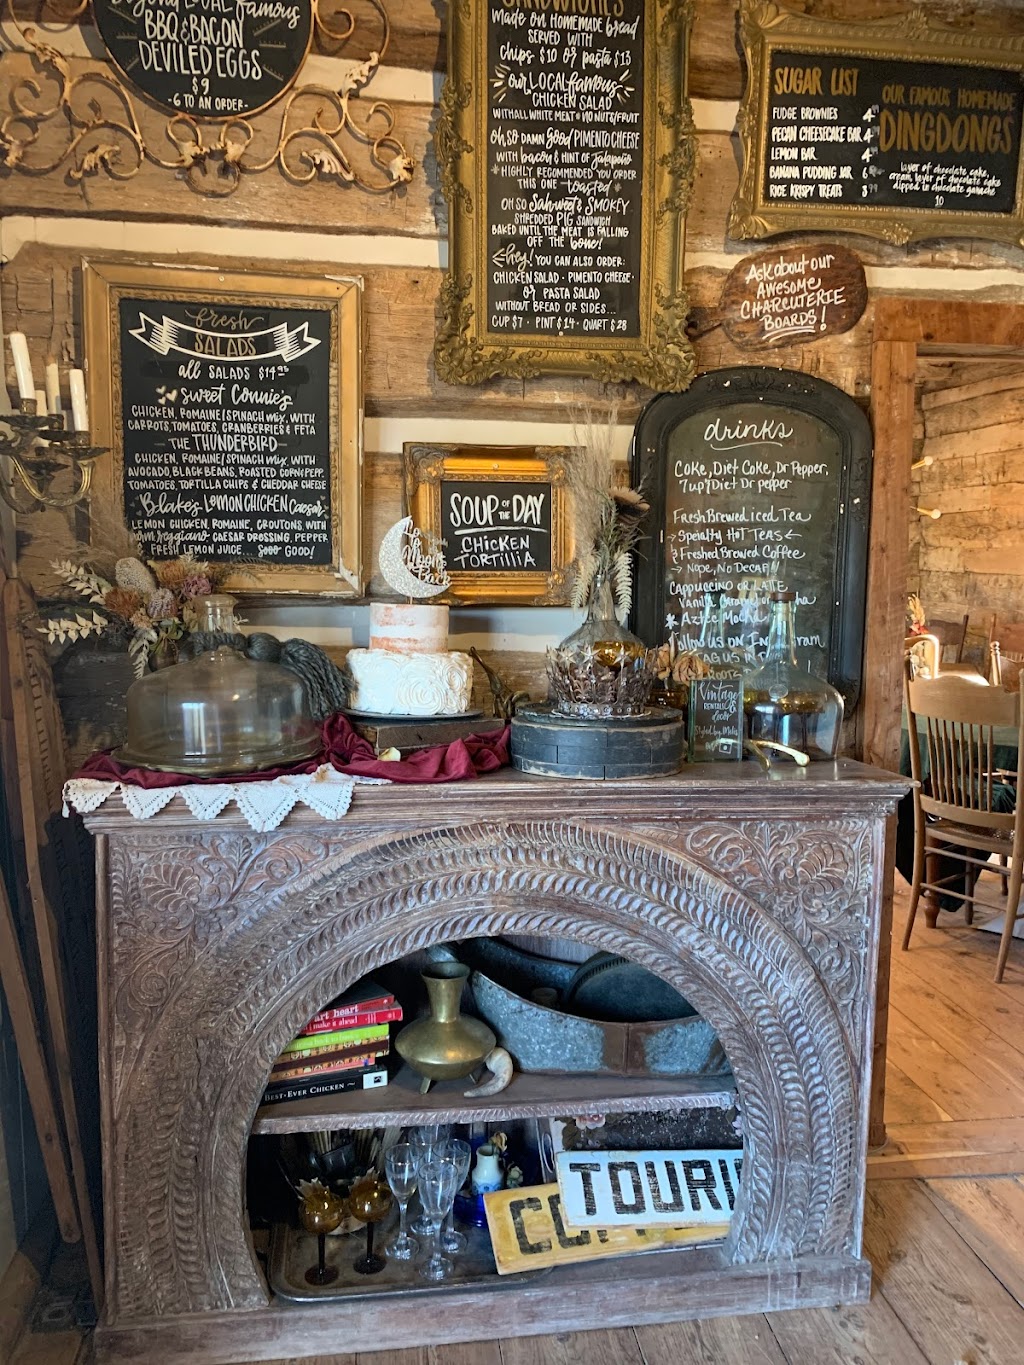 Local Roots | restaurant | Round Top, TX 78954, USA